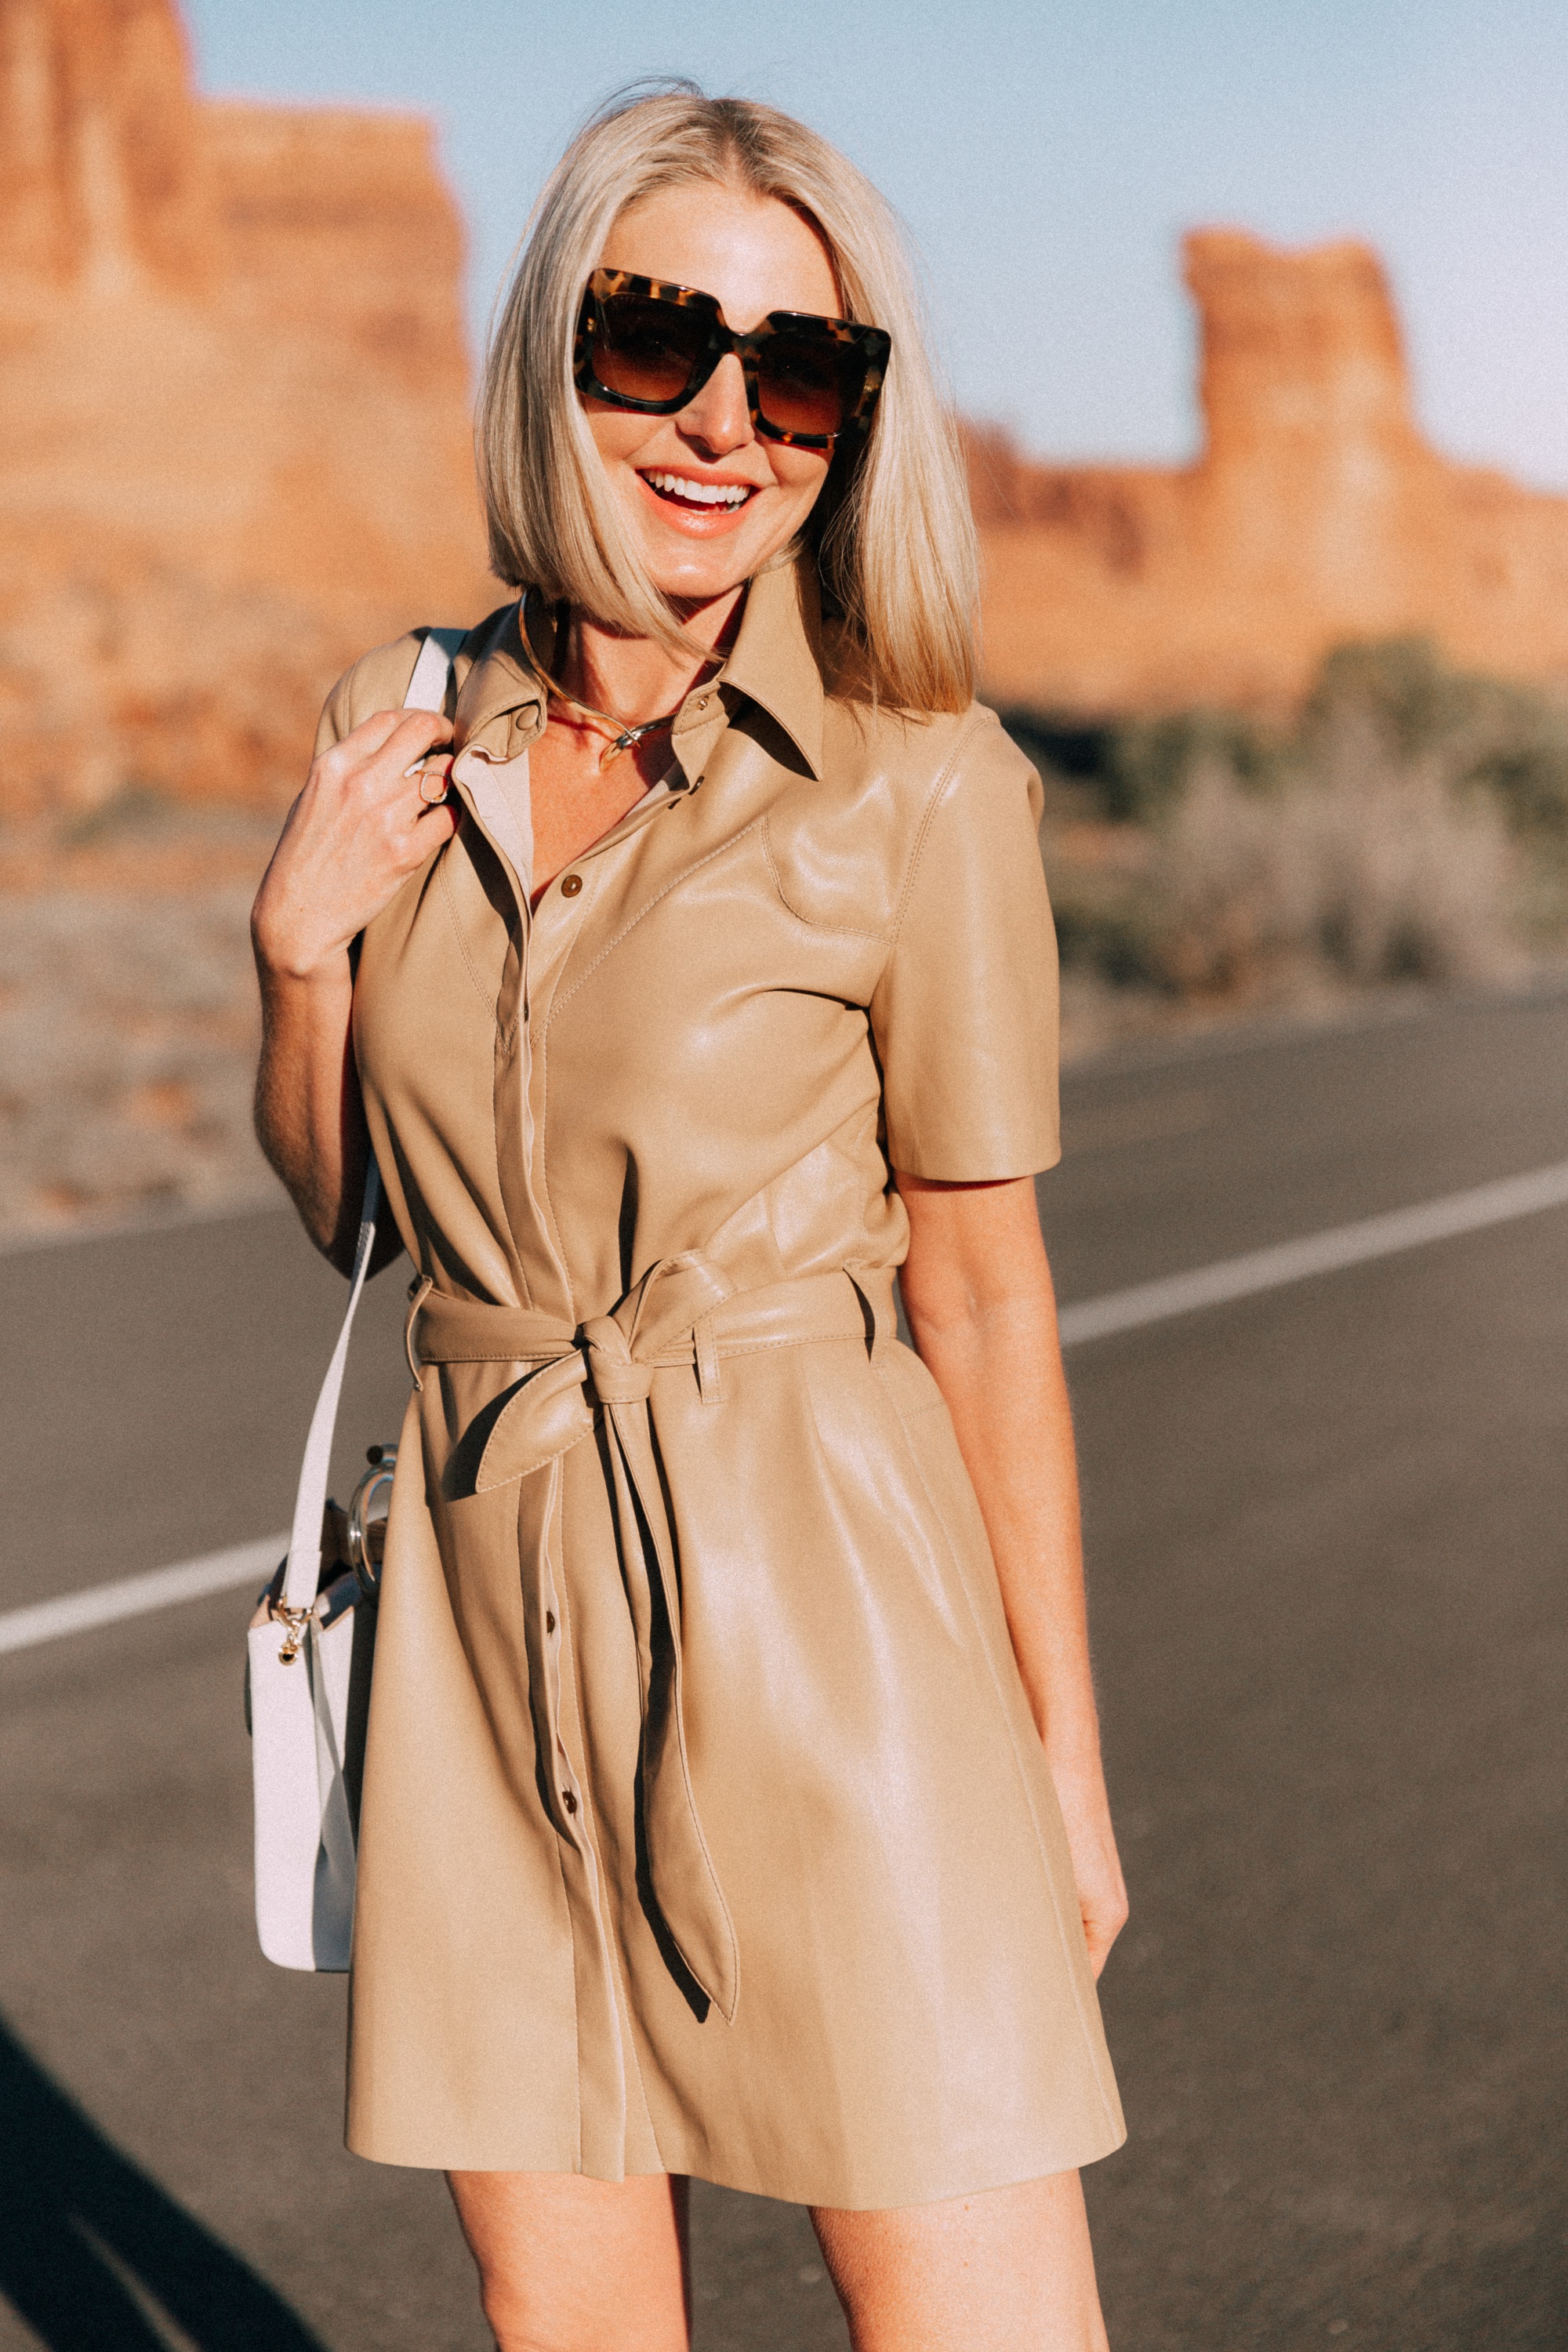 Spring Dresses, Fashion blogger Erin Busbee of BusbeeStyle.com wearing a chic tan leather dress with Dolce Vita python heels and a Lizzie Fortunato bag in Moab, Utah